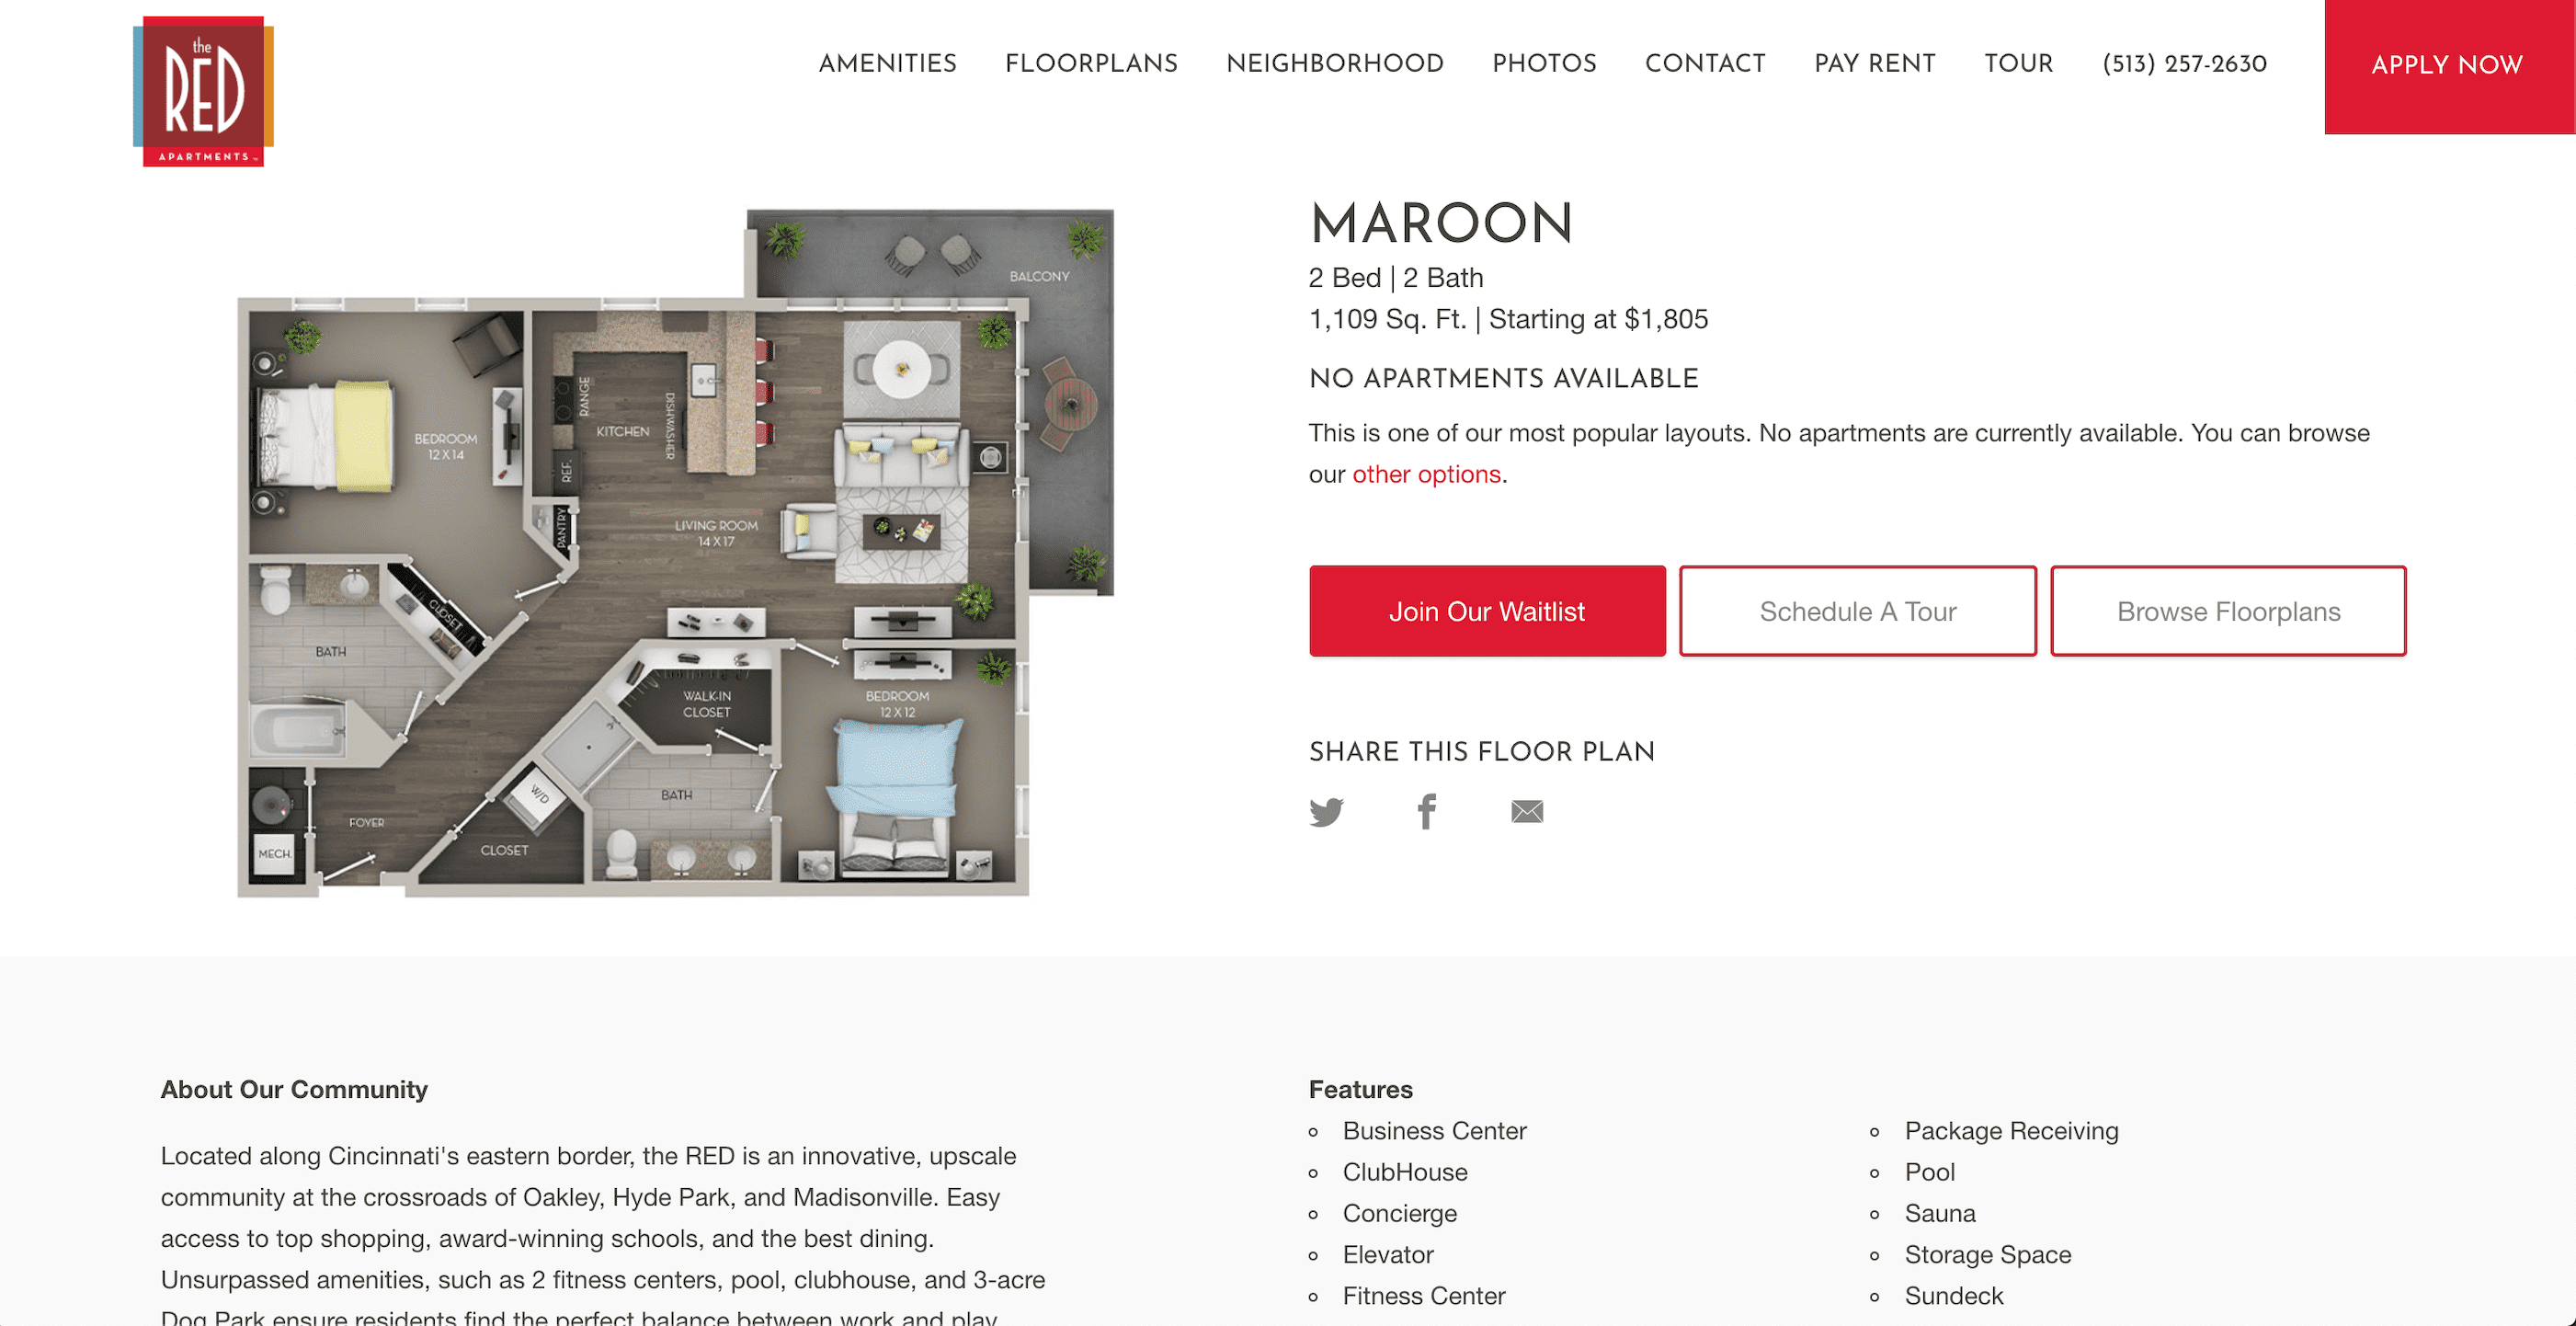 Floor Plan with no available apartments showing a Join Waitlist CTA